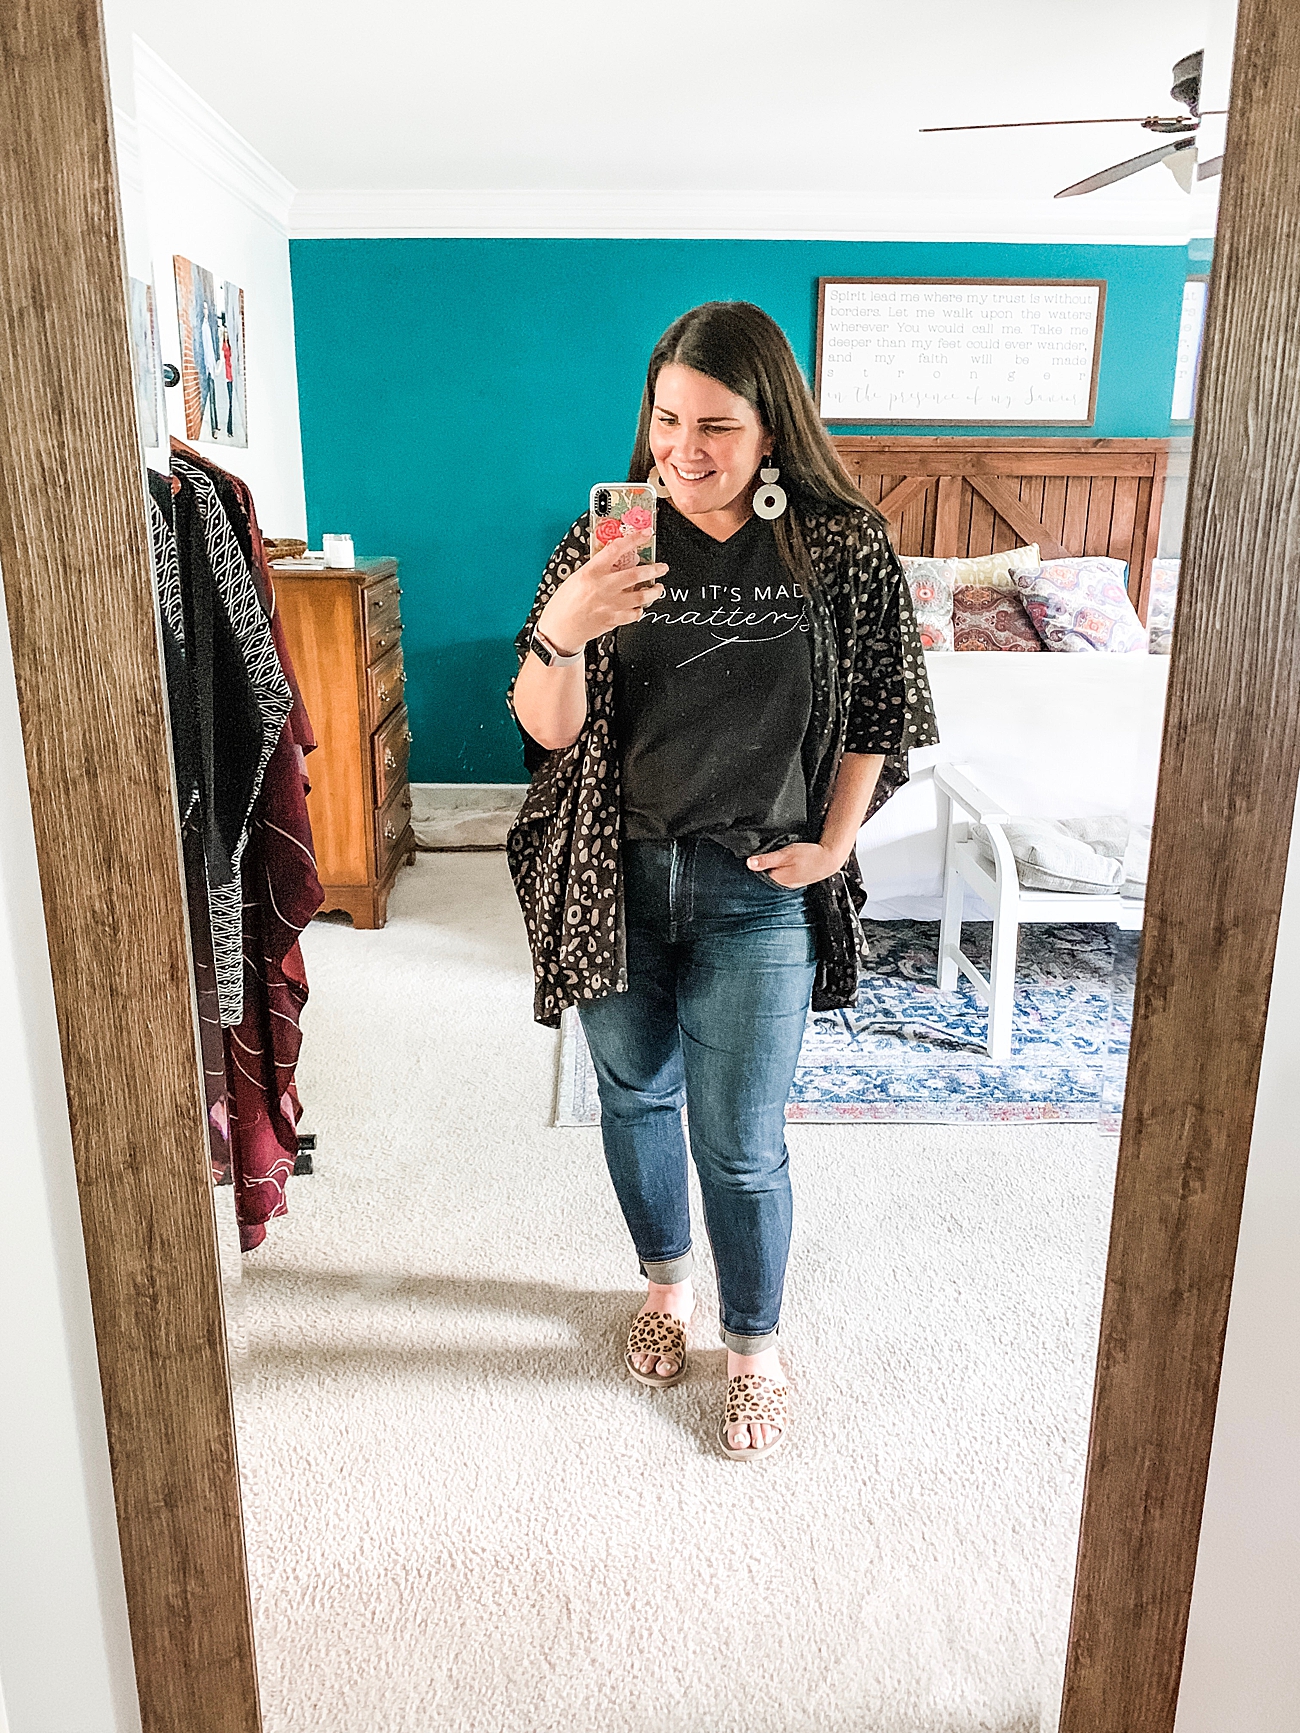 Sseko Designs Fall 2019 Sojourner Collection | Review + Try-On | Fair Trade Fashion #fairtradestyle #ethicalfashion http://www.ssekodesigns.com/mollystillman (24)